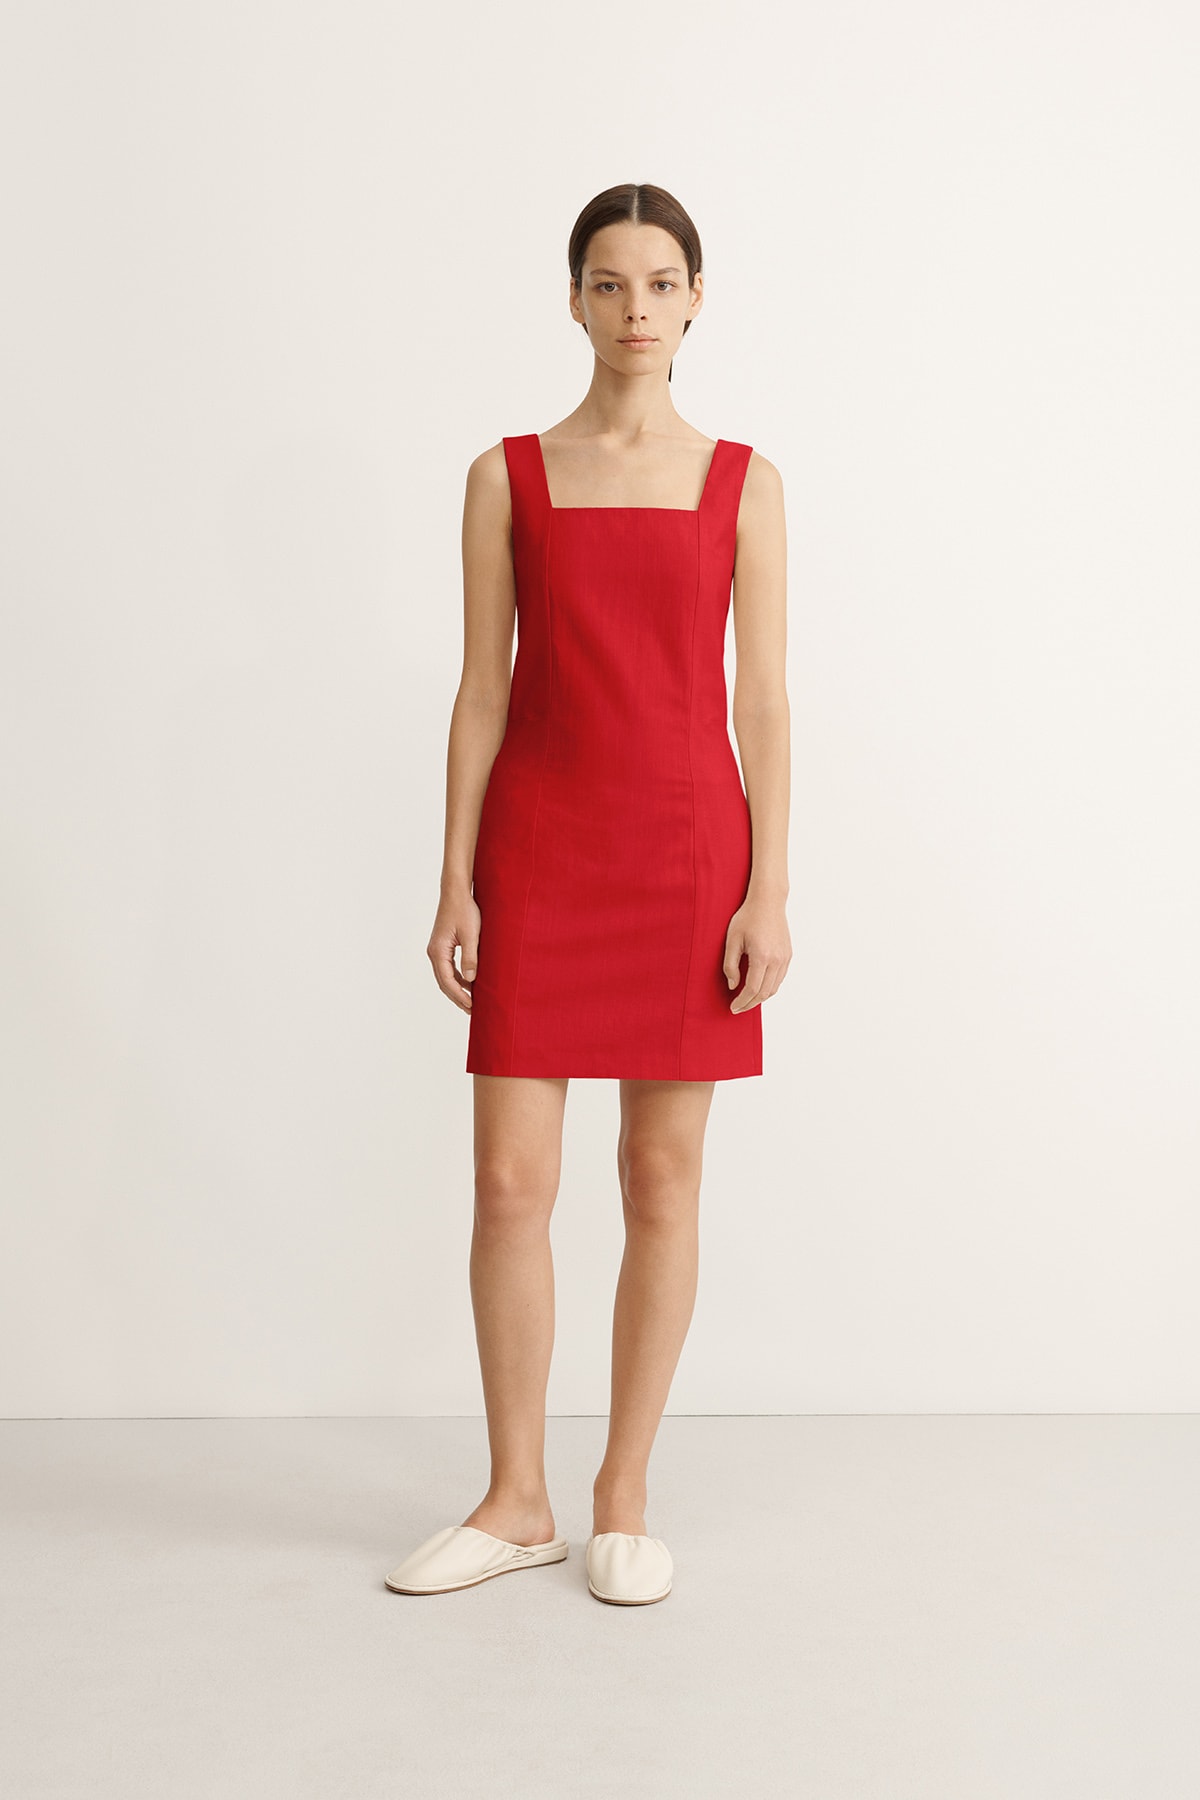 COS Spring Summer 2020 Collection Lookbook Paneled Dress Bold Red